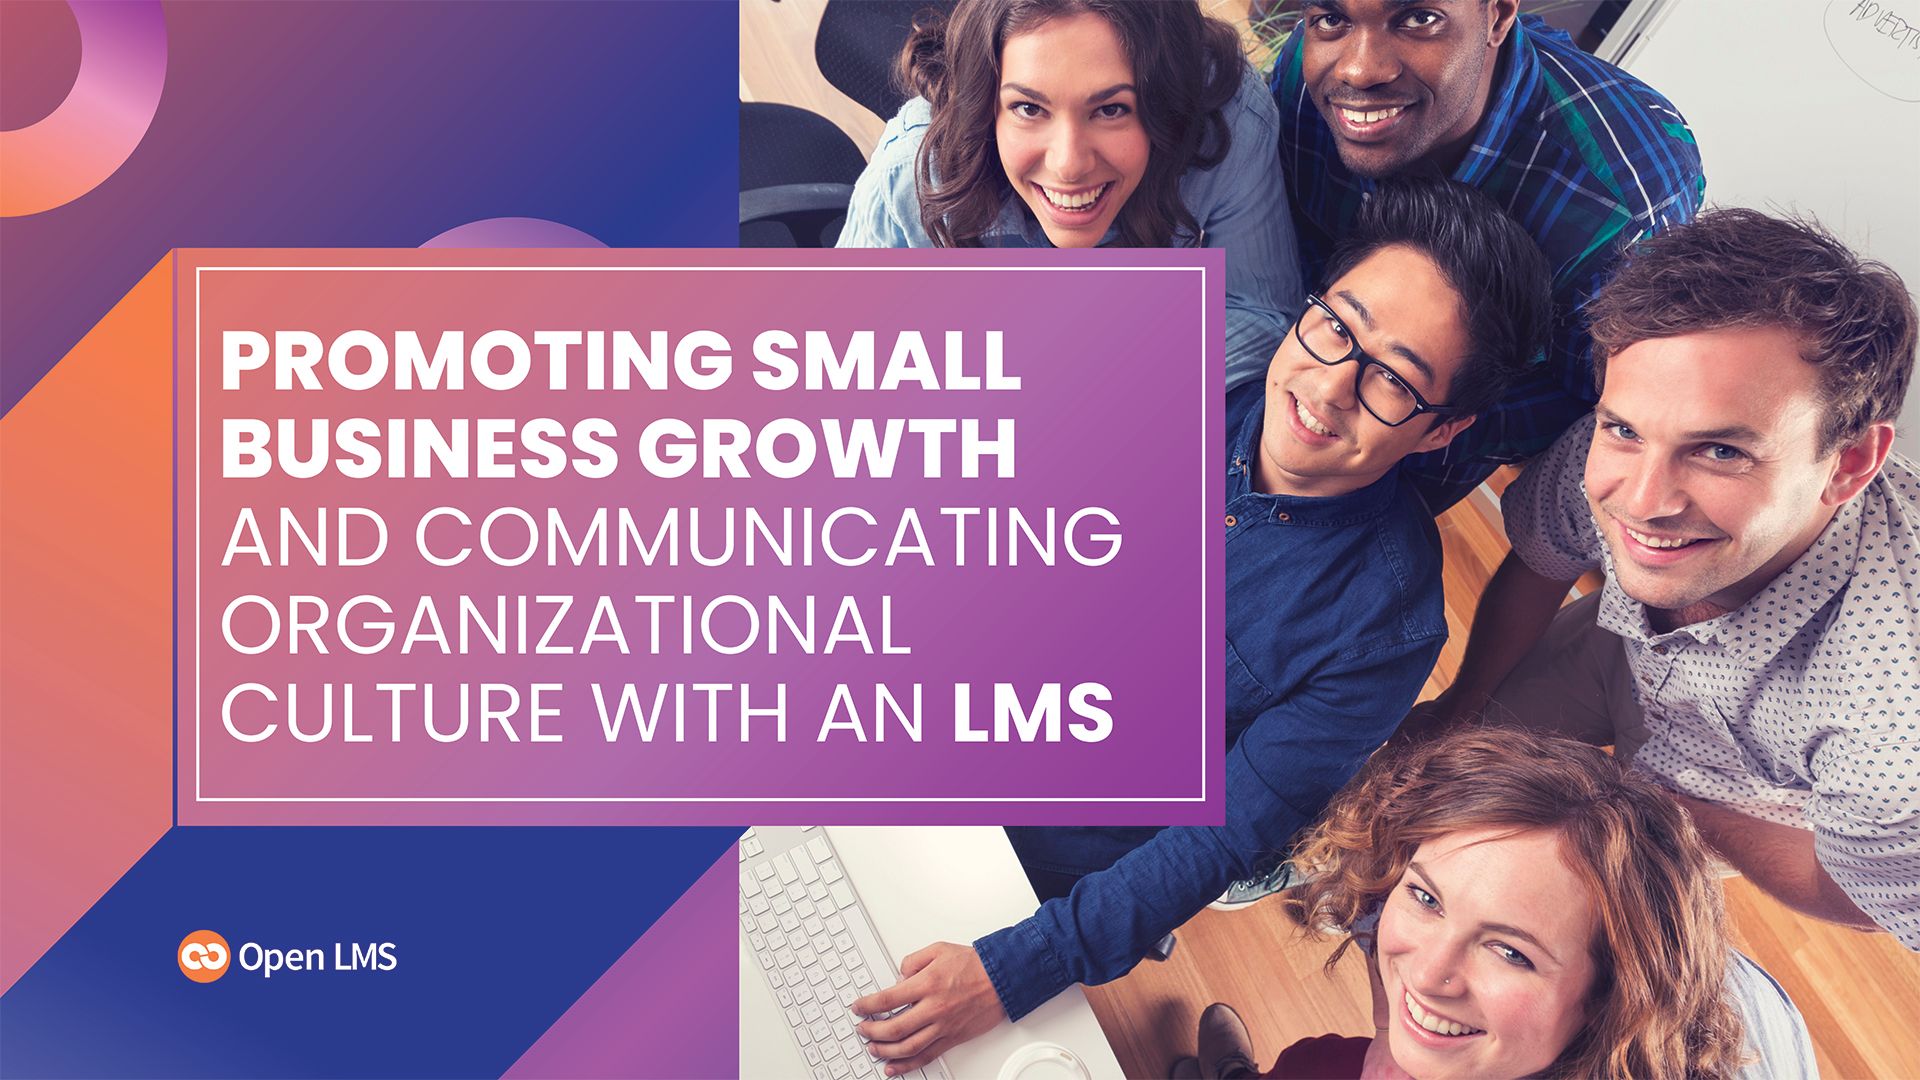 Promoting Small Business Growth and Communicating Organizational Culture With an LMS